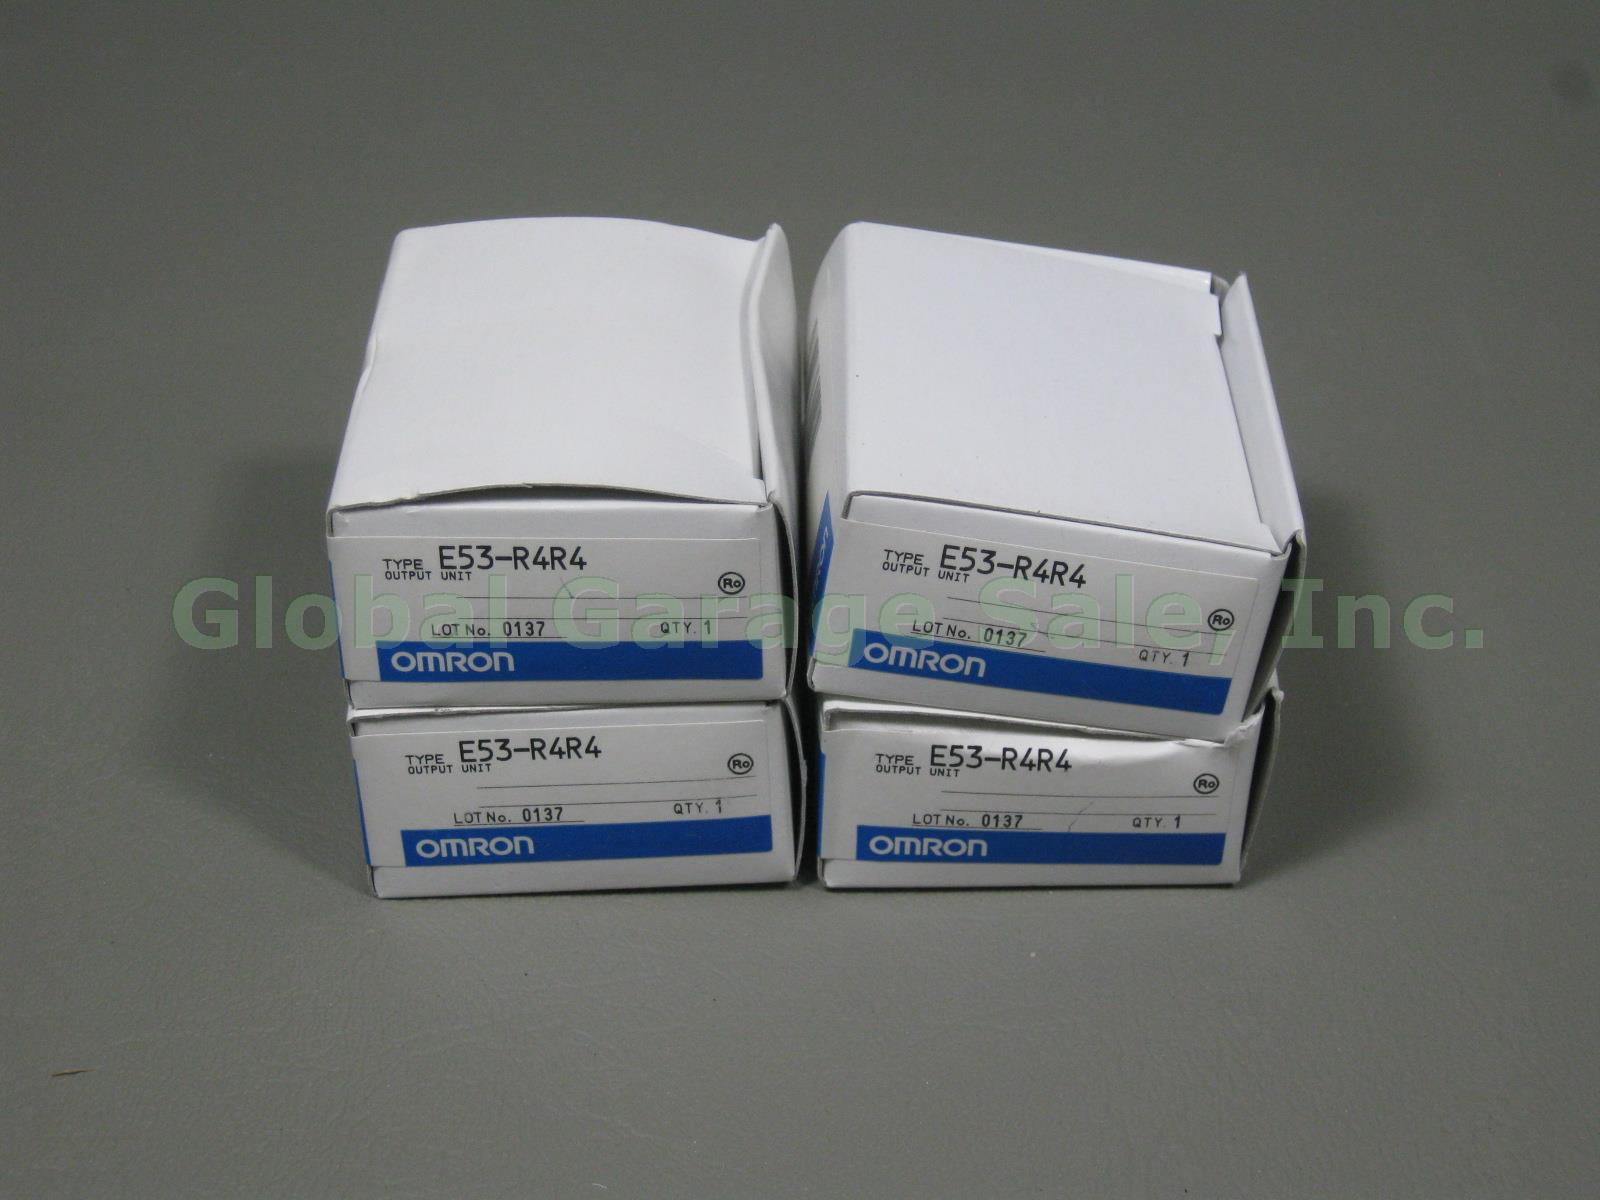 4 New Omron E53-R4R4 Input Output Module For E5CK Series Digital Controllers NR!